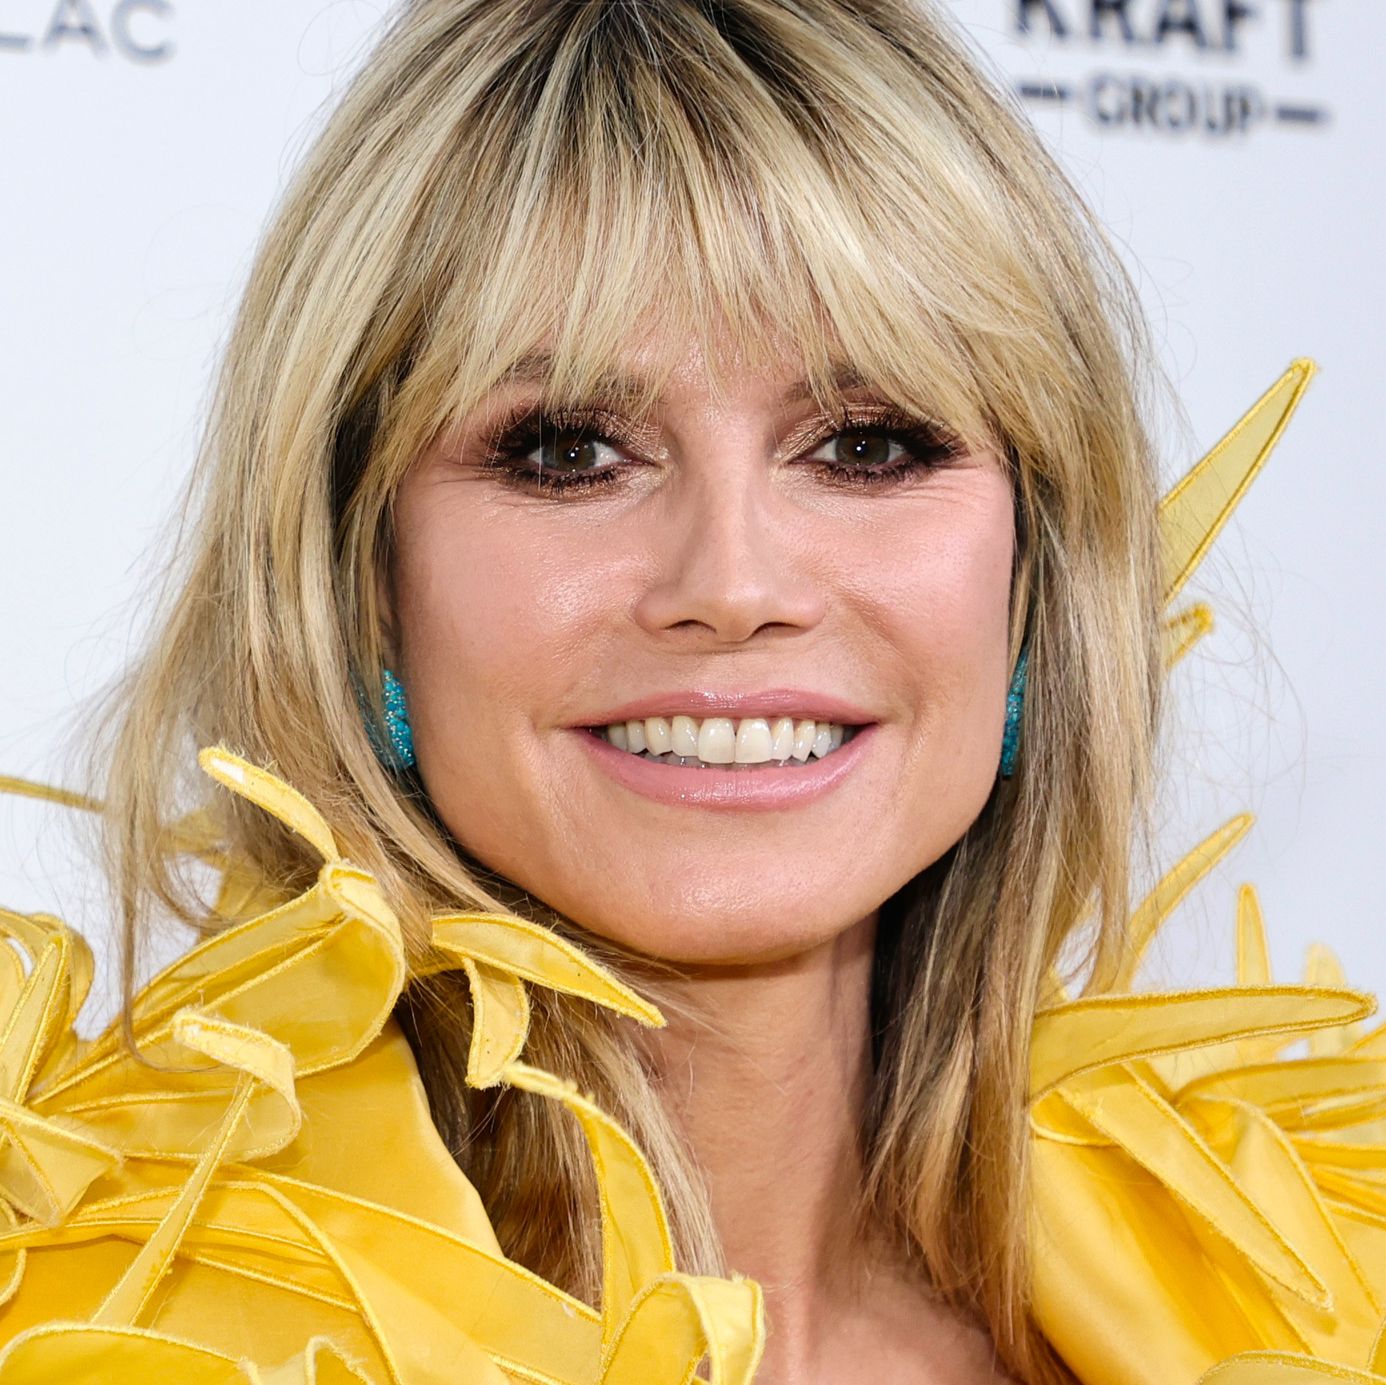 Heidi Klum Left Fans With So Many Mixed Emotions After Her 